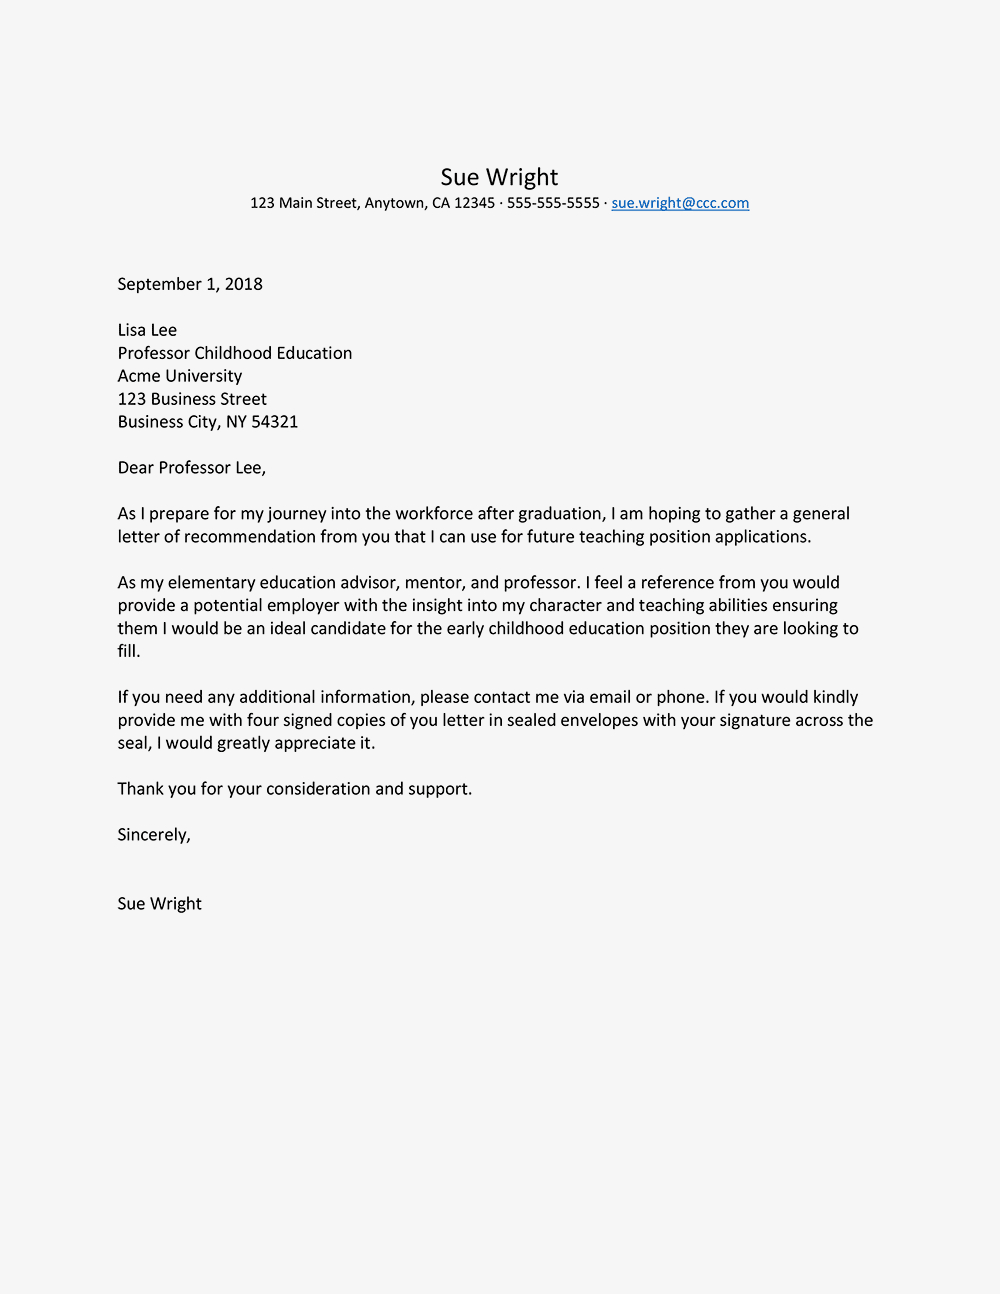 Request For Recommendation Letter From Professor Sample with dimensions 1000 X 1294